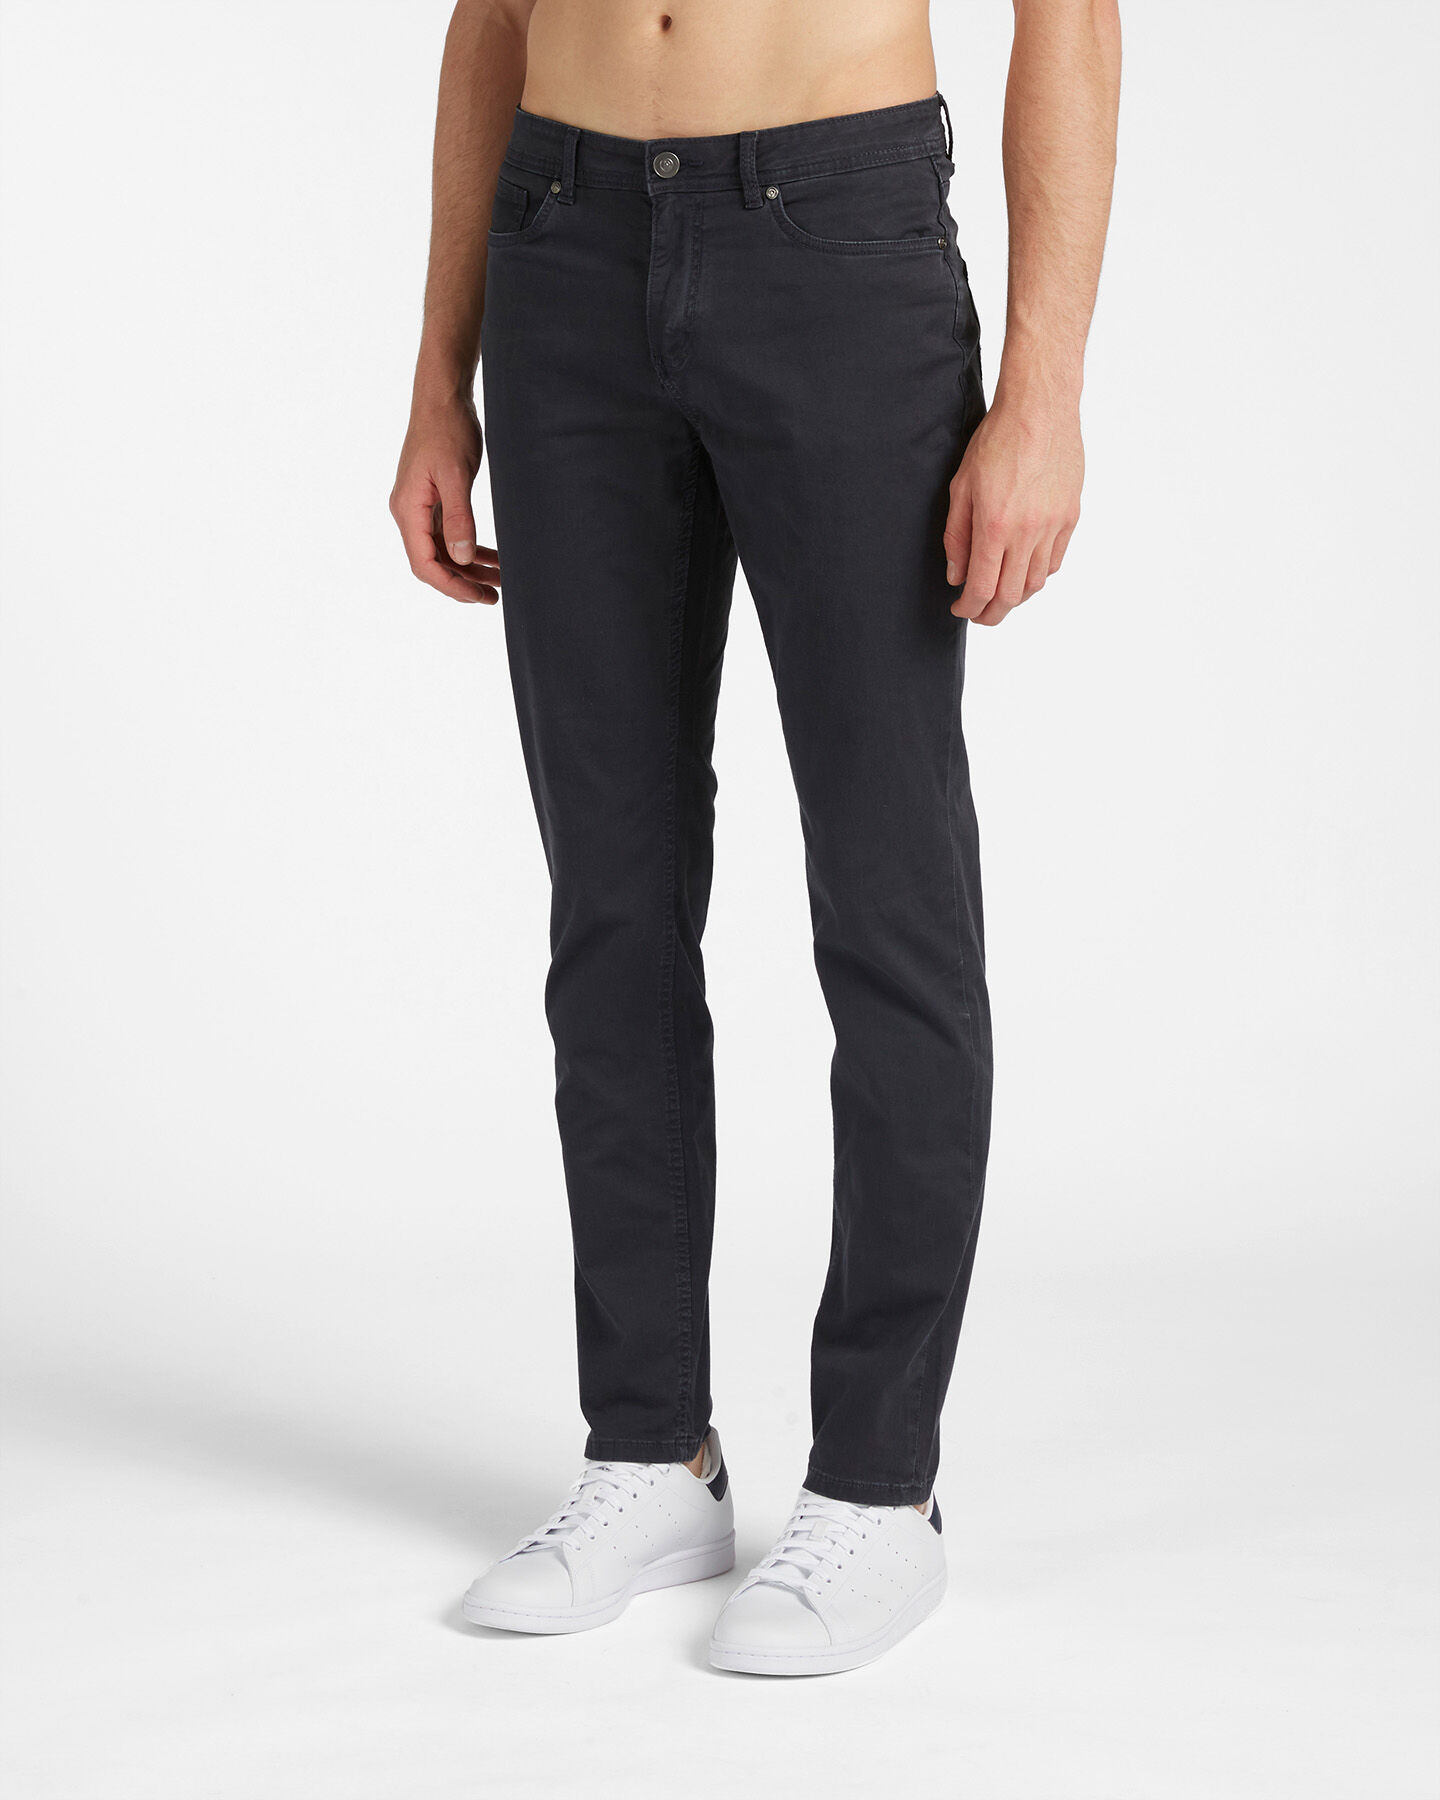  Pantalone DACK'S BASIC COLLECTION M S4118683|1125|44 scatto 2